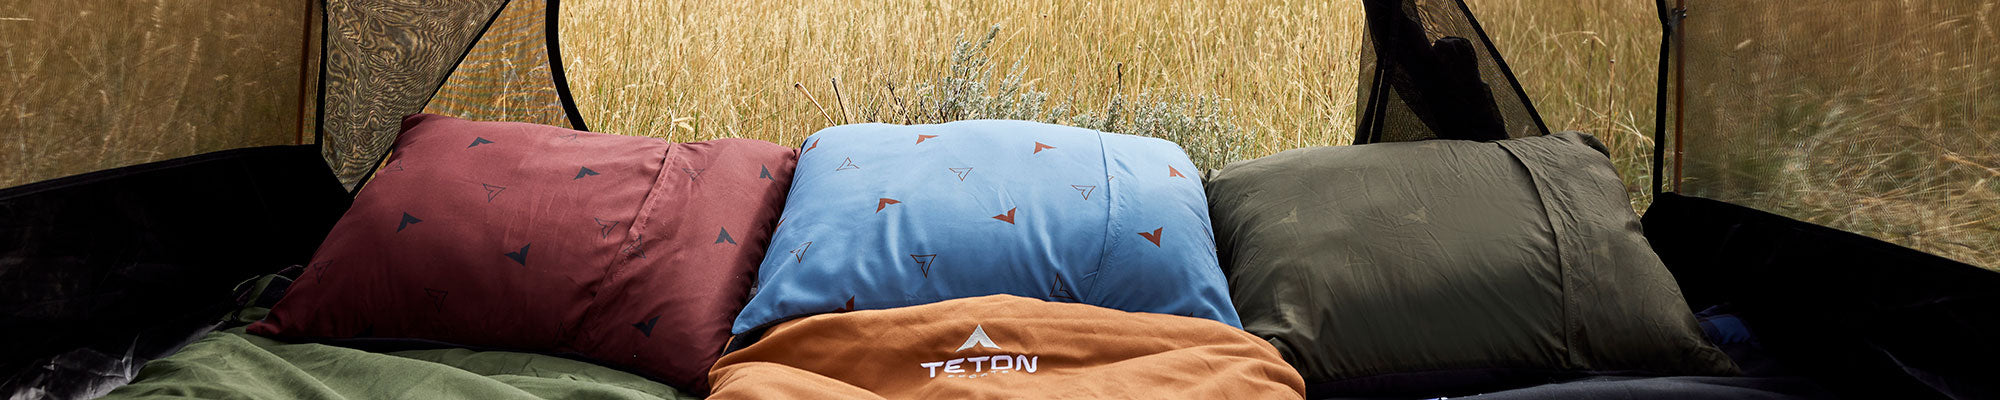 TETON Sports Grand Camp Pillows in three colors are shown laying with sleeping bags in a tent.